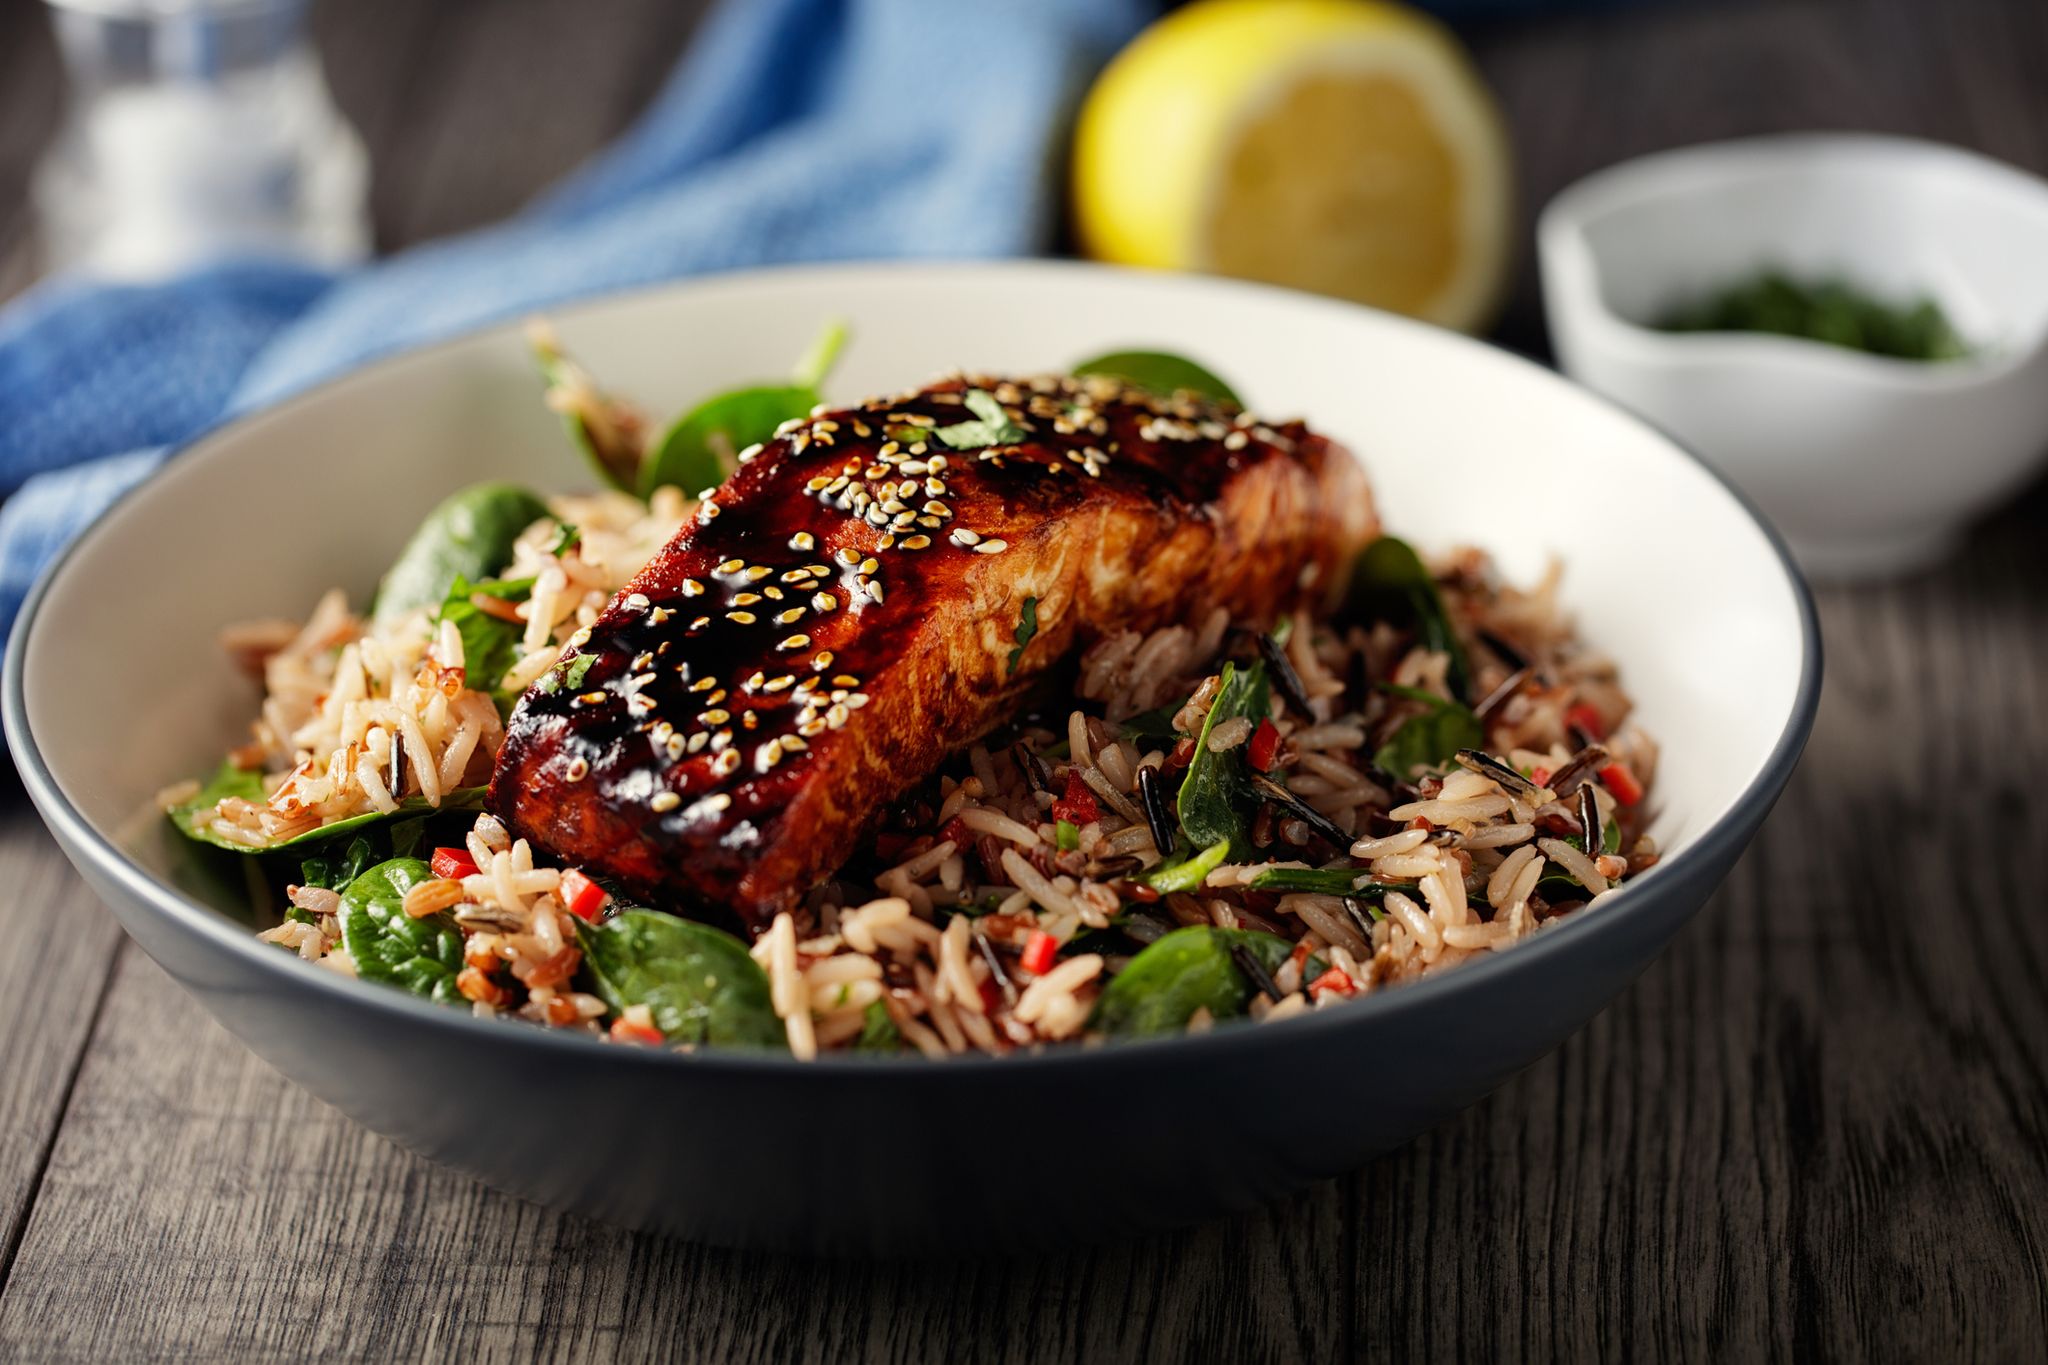 healthy wild rice salad with grilled teriyaki salmon fillet